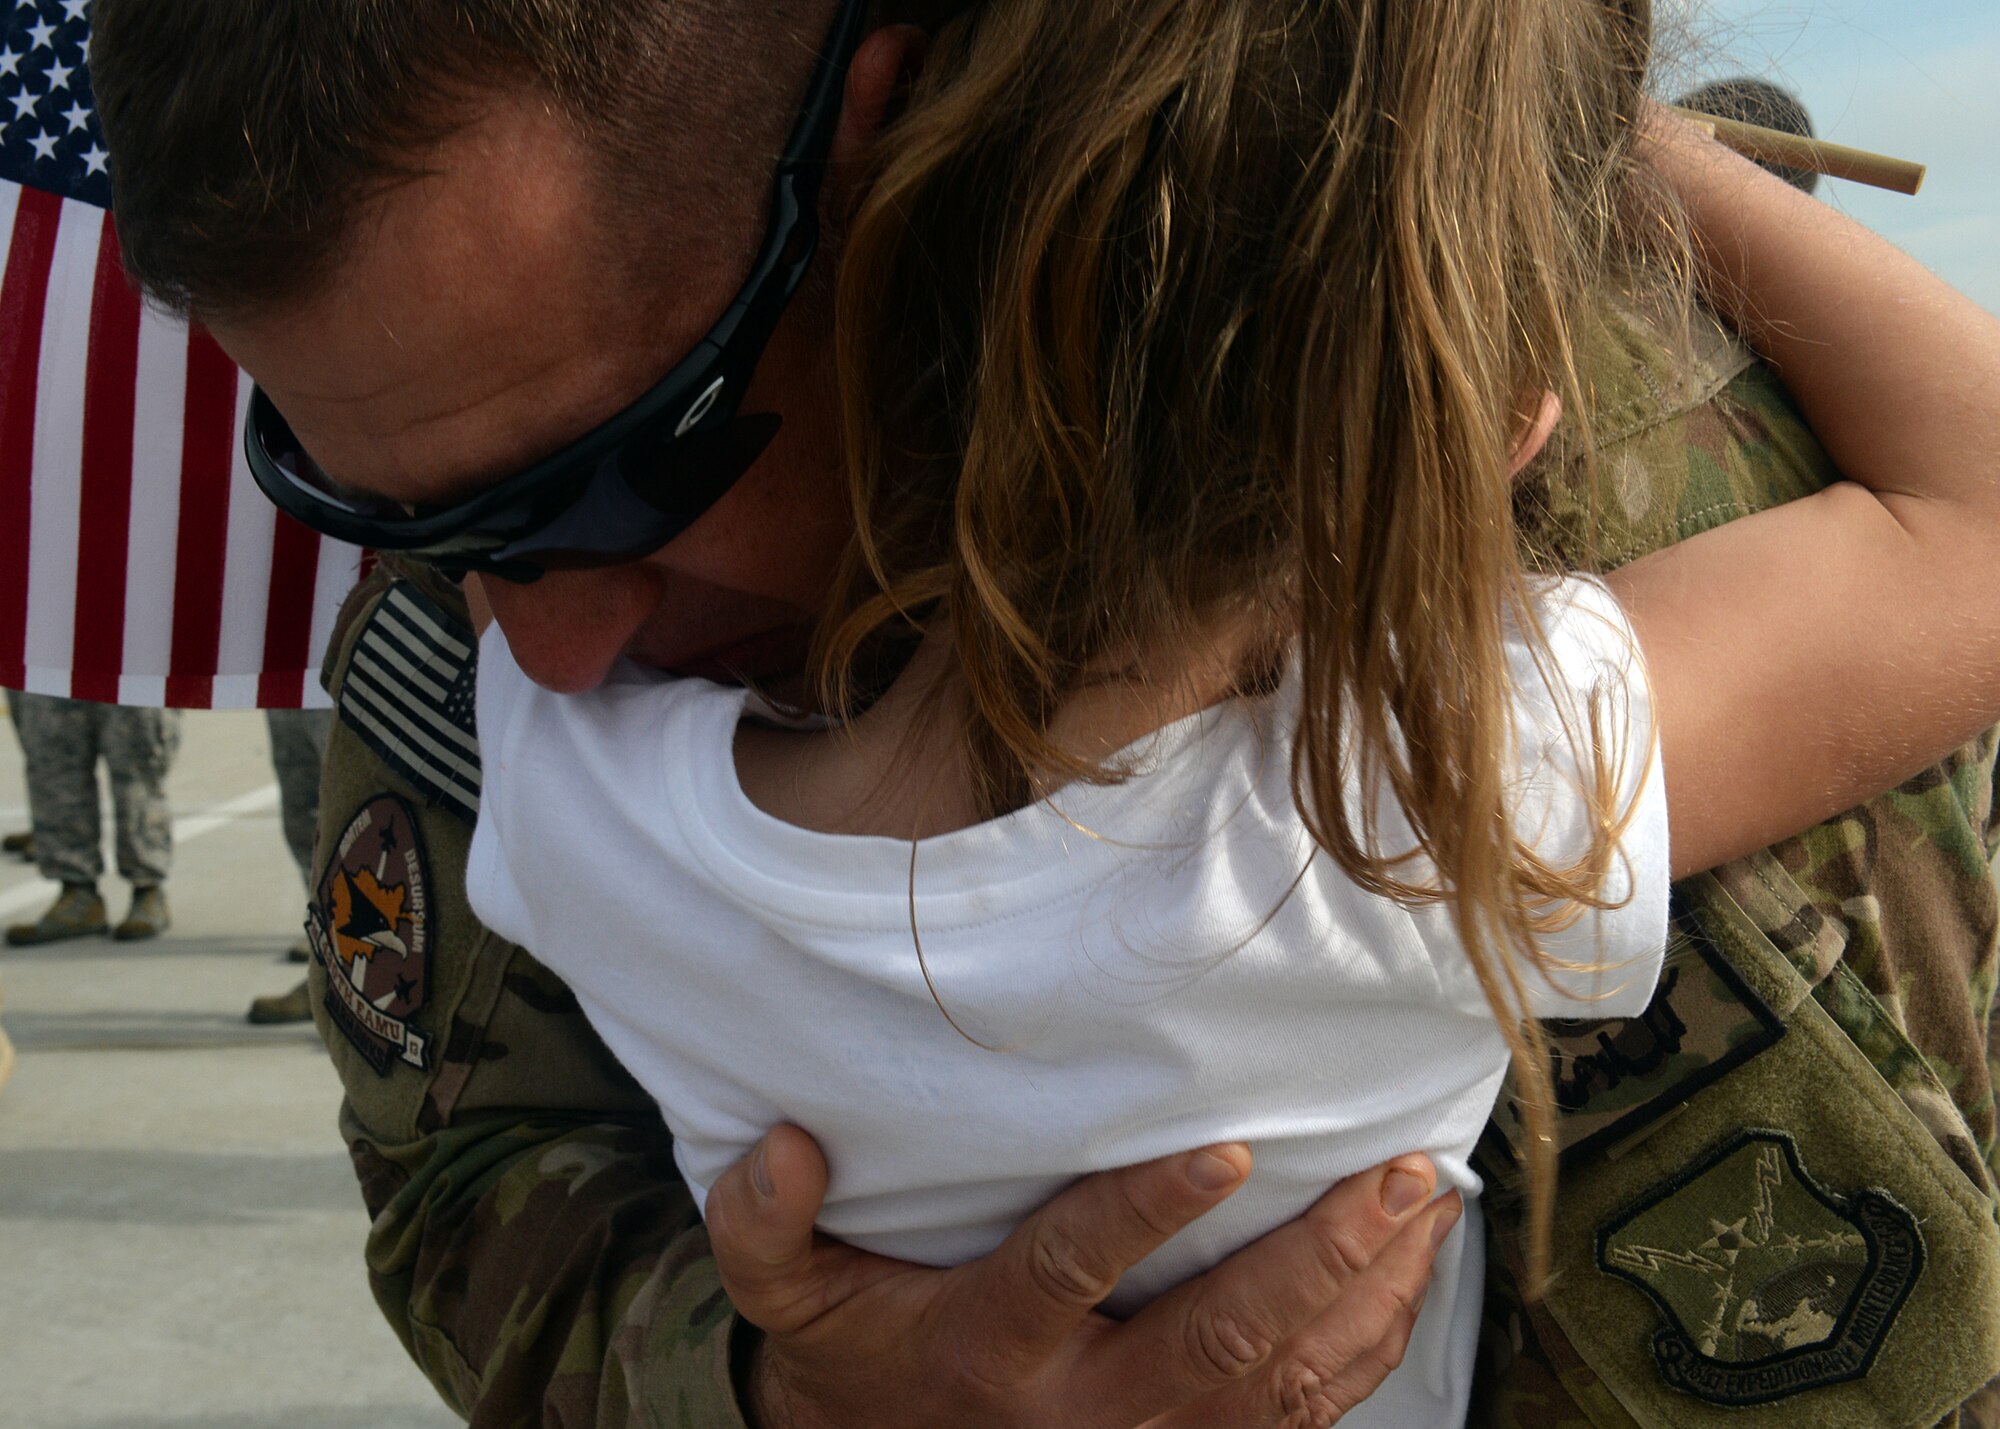 SPANGDAHLEM AIR BASE, Germany -- U.S. Air Force Senior Master Sgt. Todd Scholl, 52nd Aircraft Maintenance Squadron, hugs his daughter Brooklyn here Sept. 21, 2013, after returning from a deployment to southwest Asia supporting Operation Enduring Freedom. Scholl's children painted welcome-home signs and wore decorated clothing for his return. (U.S. Air Force photo by Staff Sgt. Daryl Knee/Released)